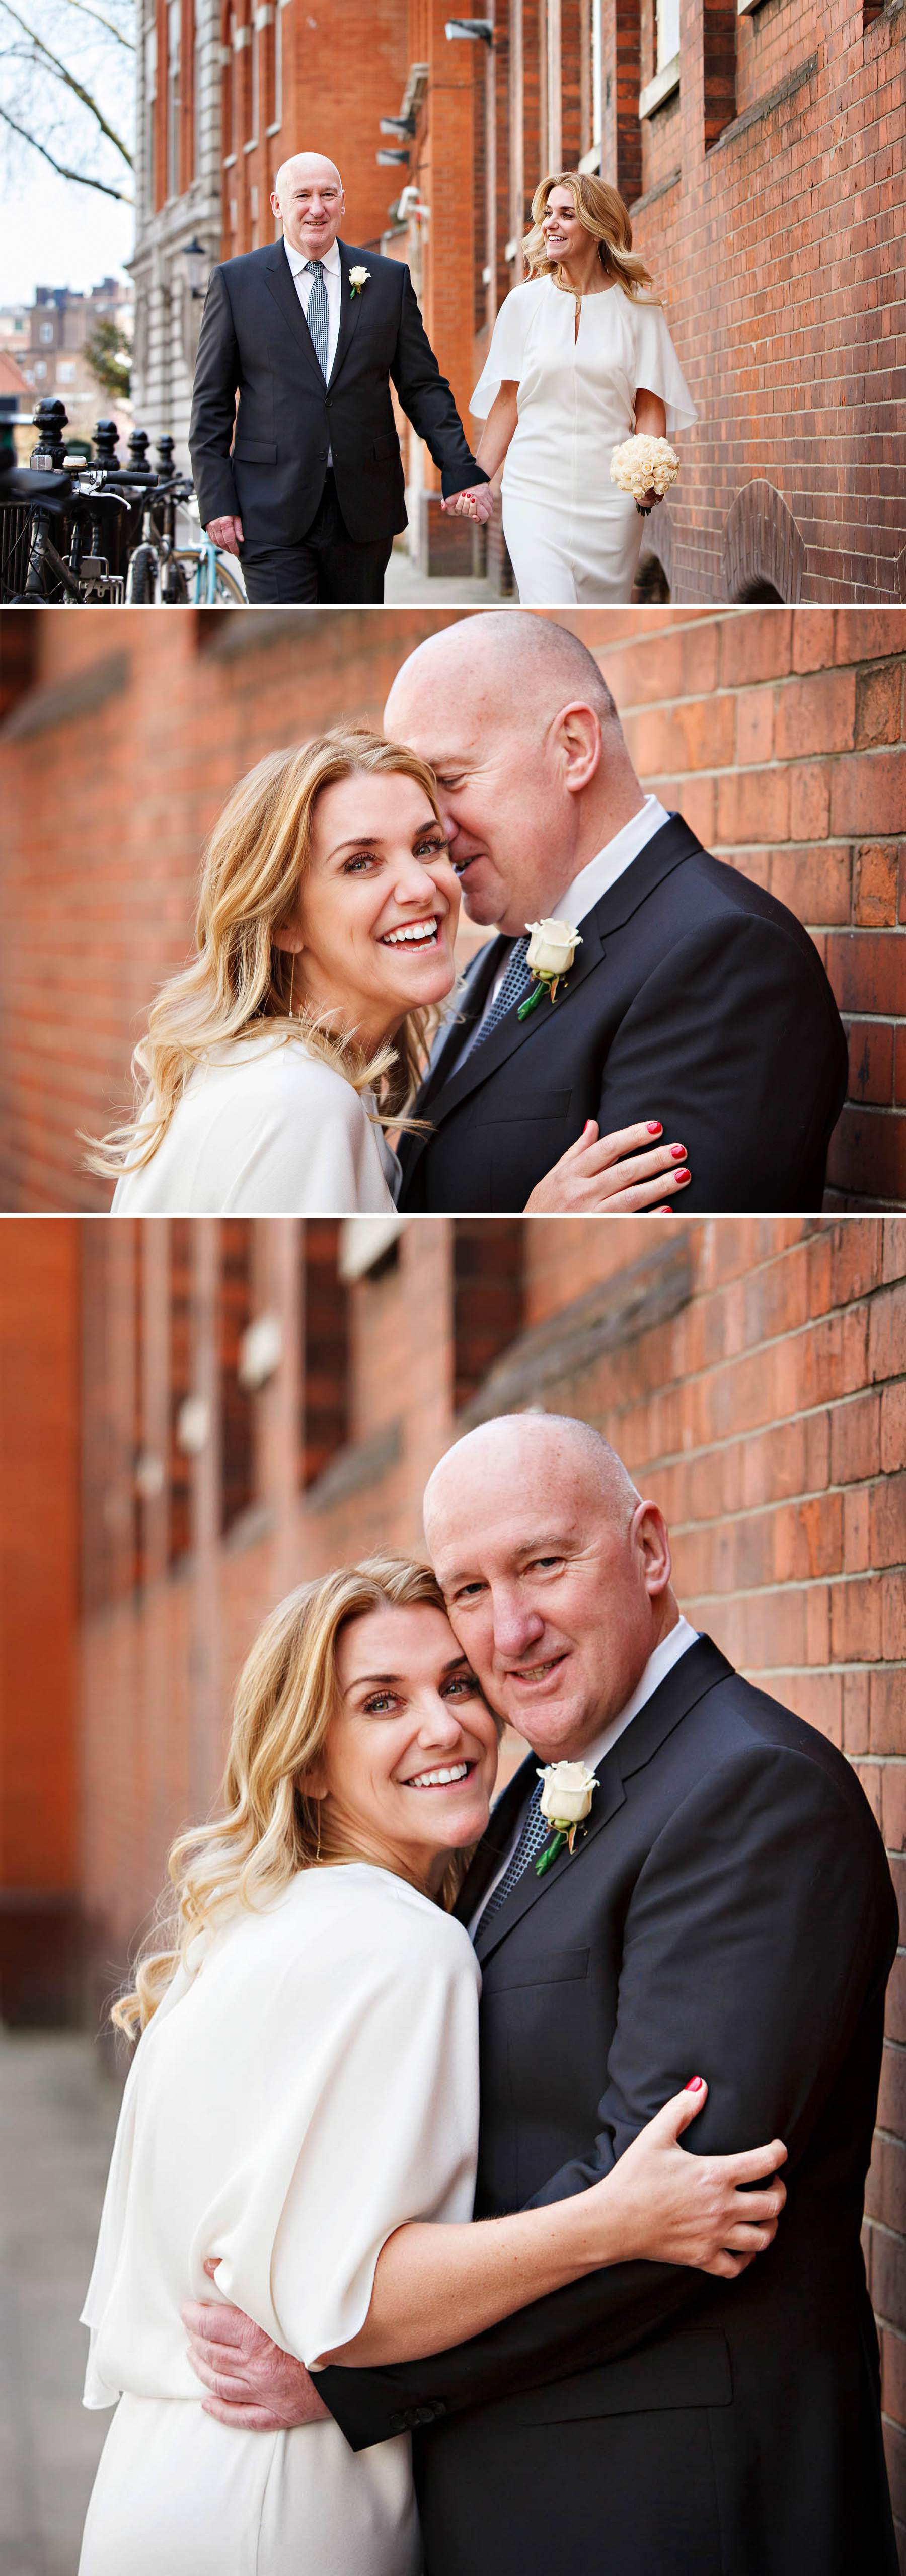 Wedding portraits in Chelsea after the couple's intimate wedding at Chelsea Register Office